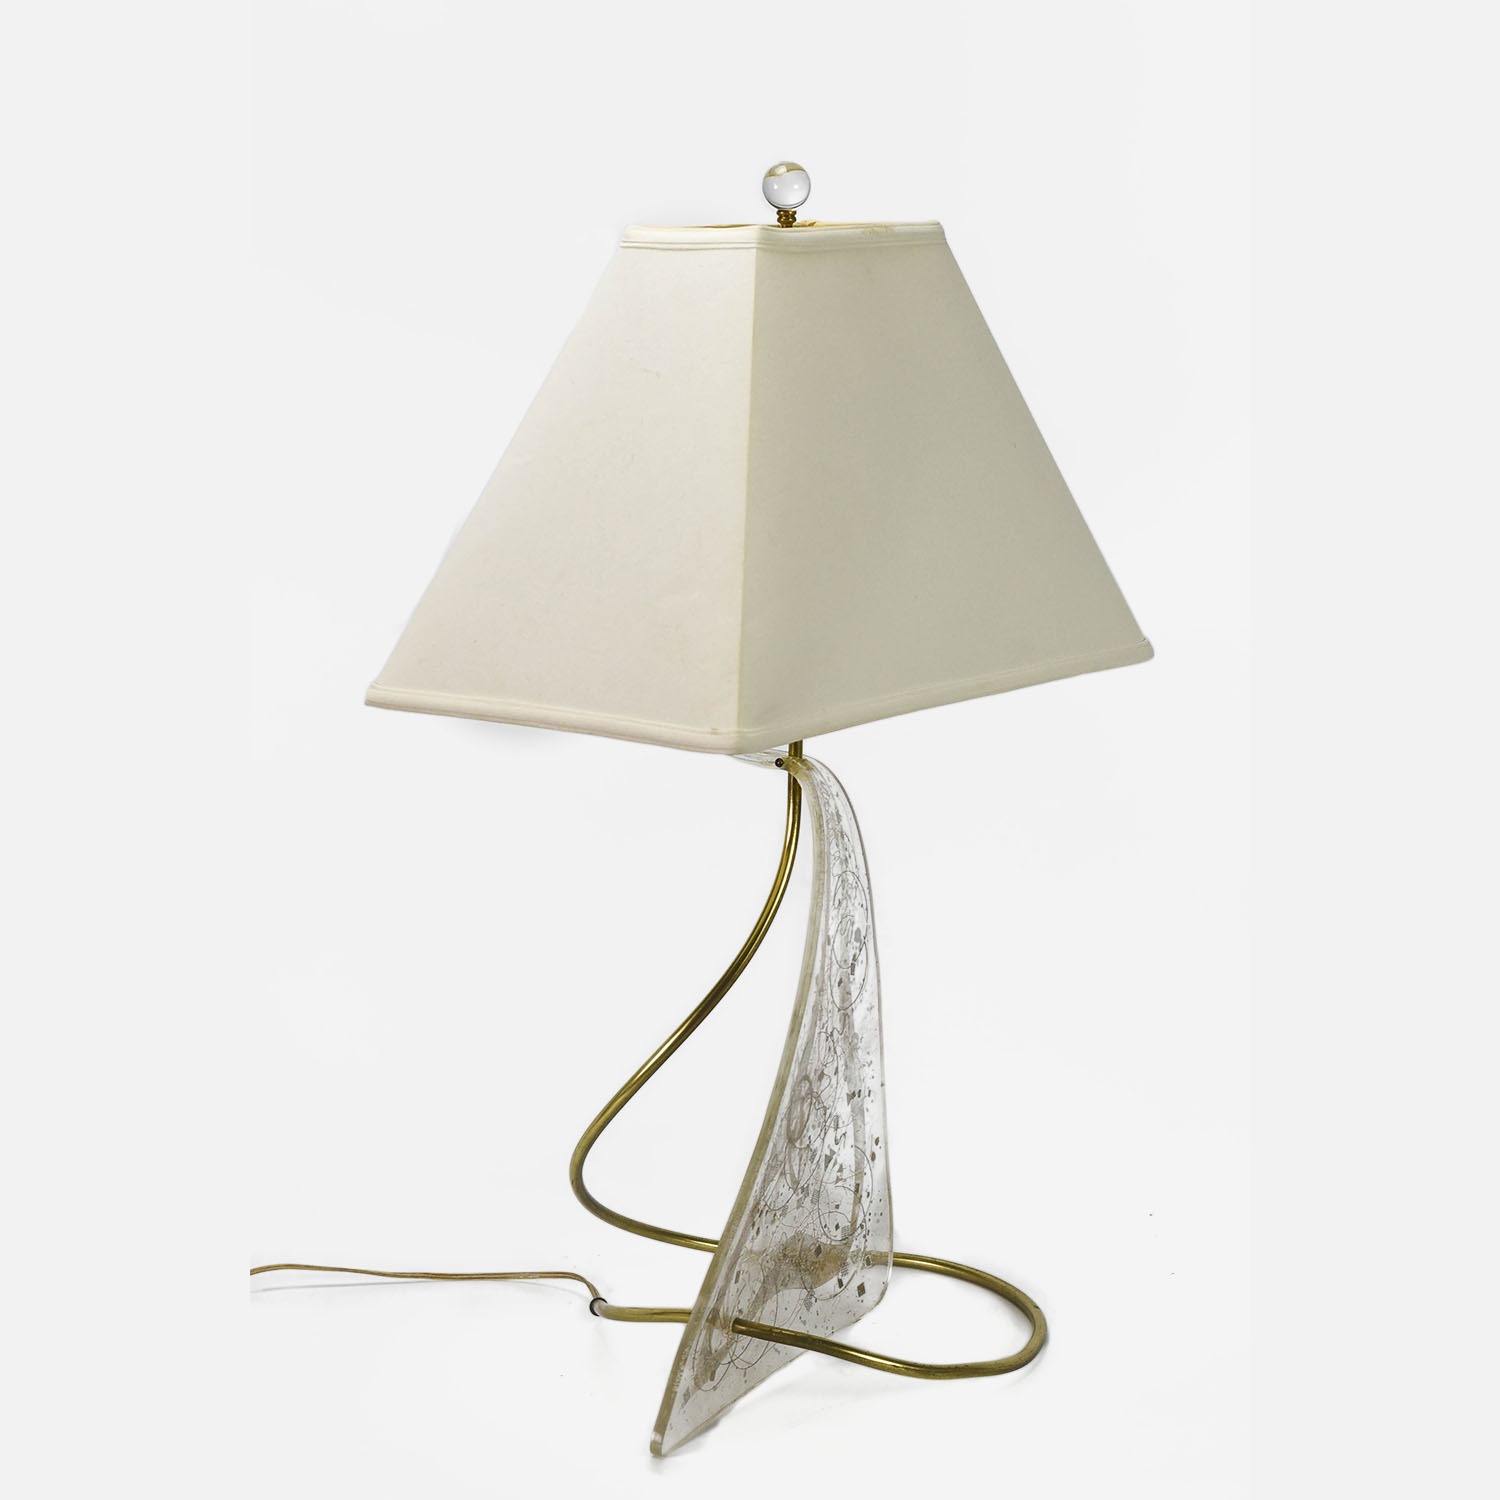 1950s Biomorphic Lucite and Brass MCM Table Lamp